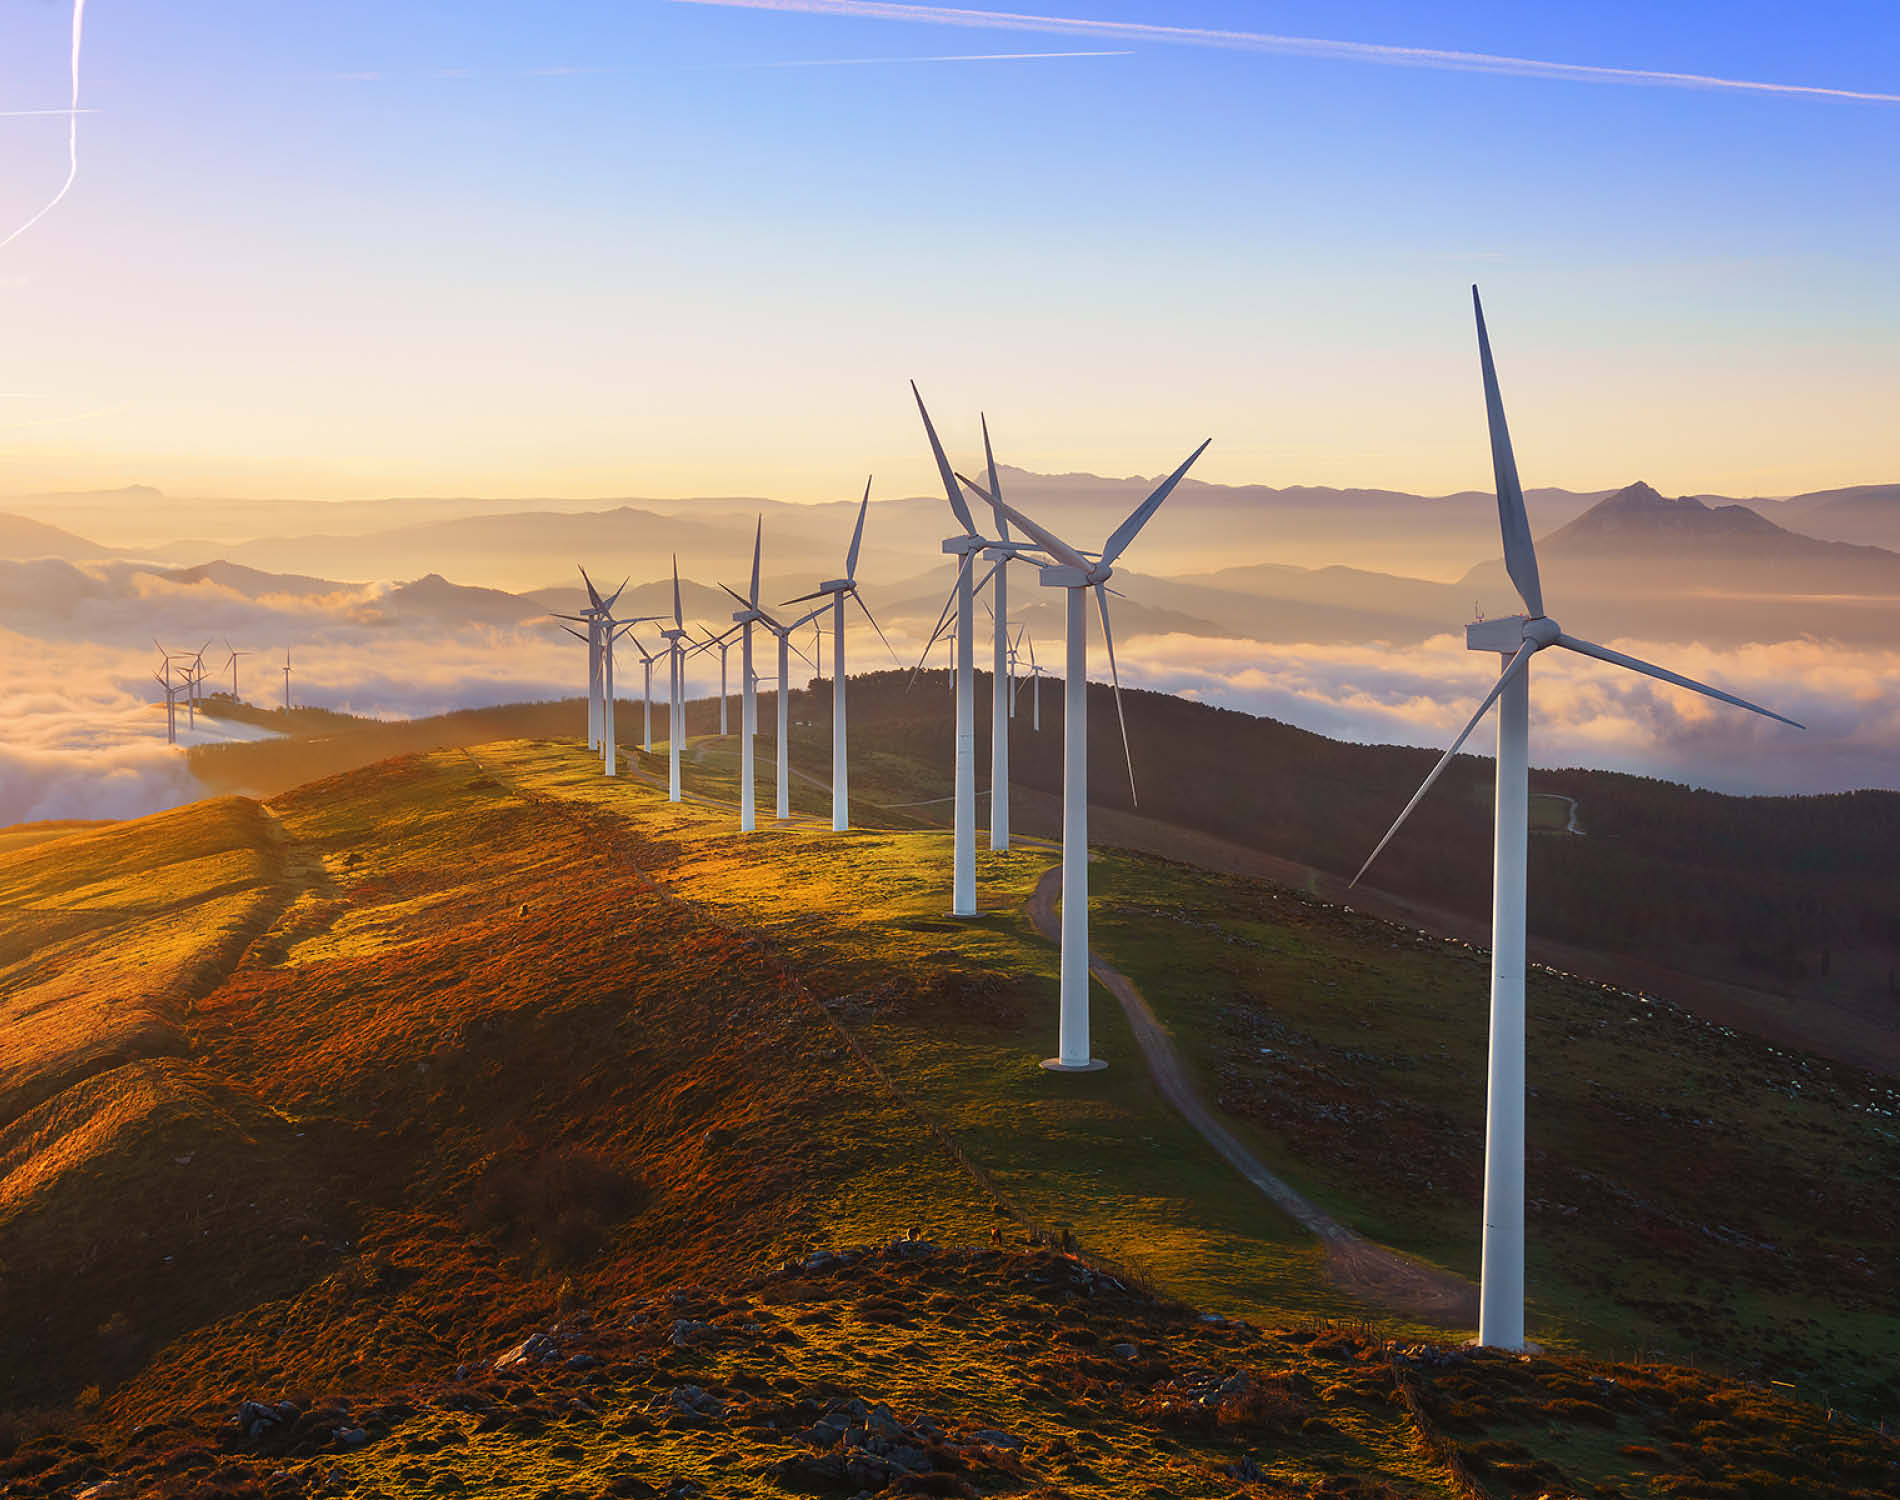 /-/media/images/website/background-images/industry-sectors/energy/energy_wind_istock-505412046.ashx?sc_lang=pl-pl